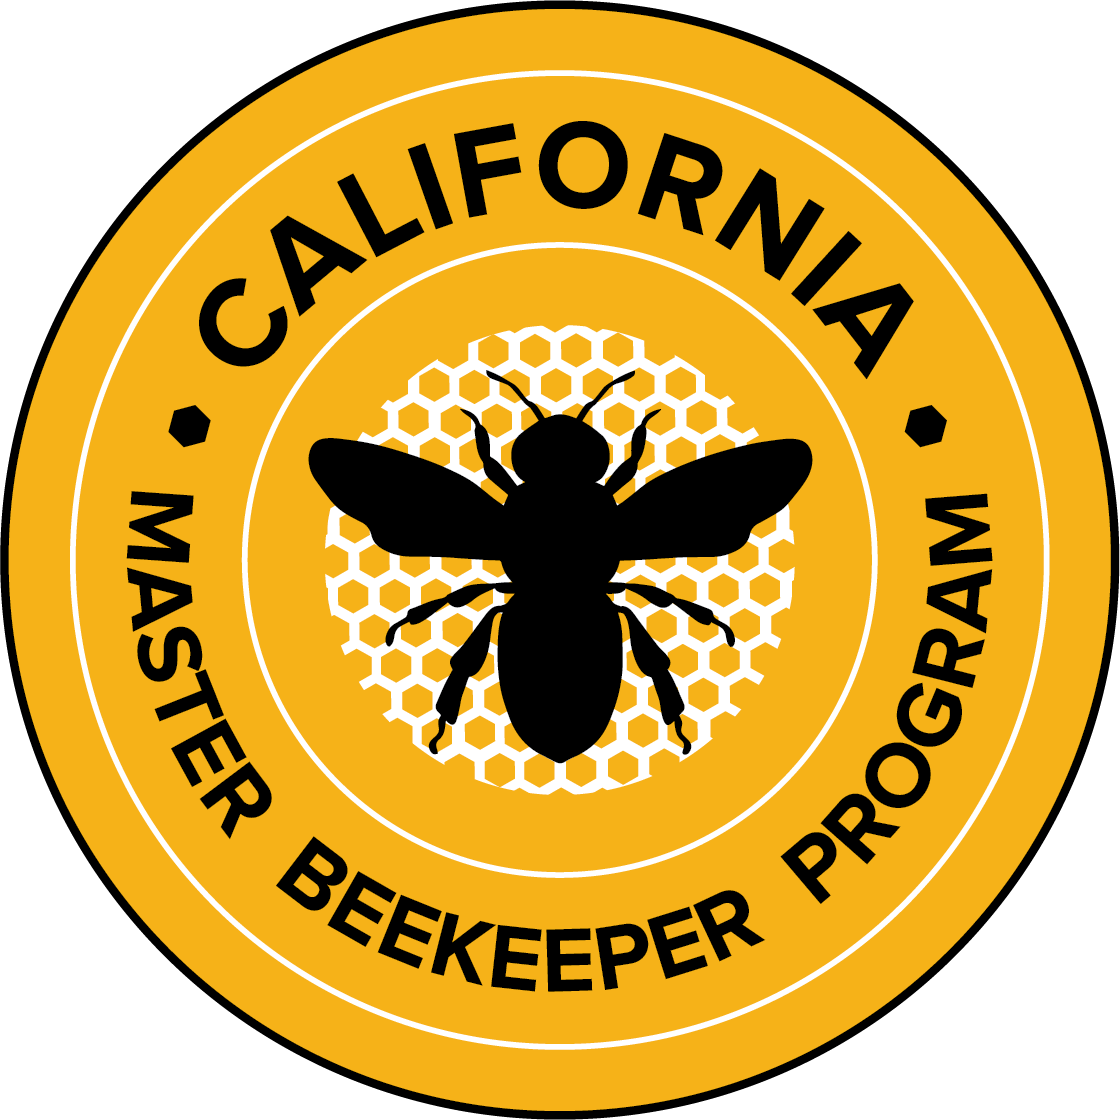 California Master Beekeeper Program | Using science based information to educate stewards & ambassadors for honey bees and beekeeping